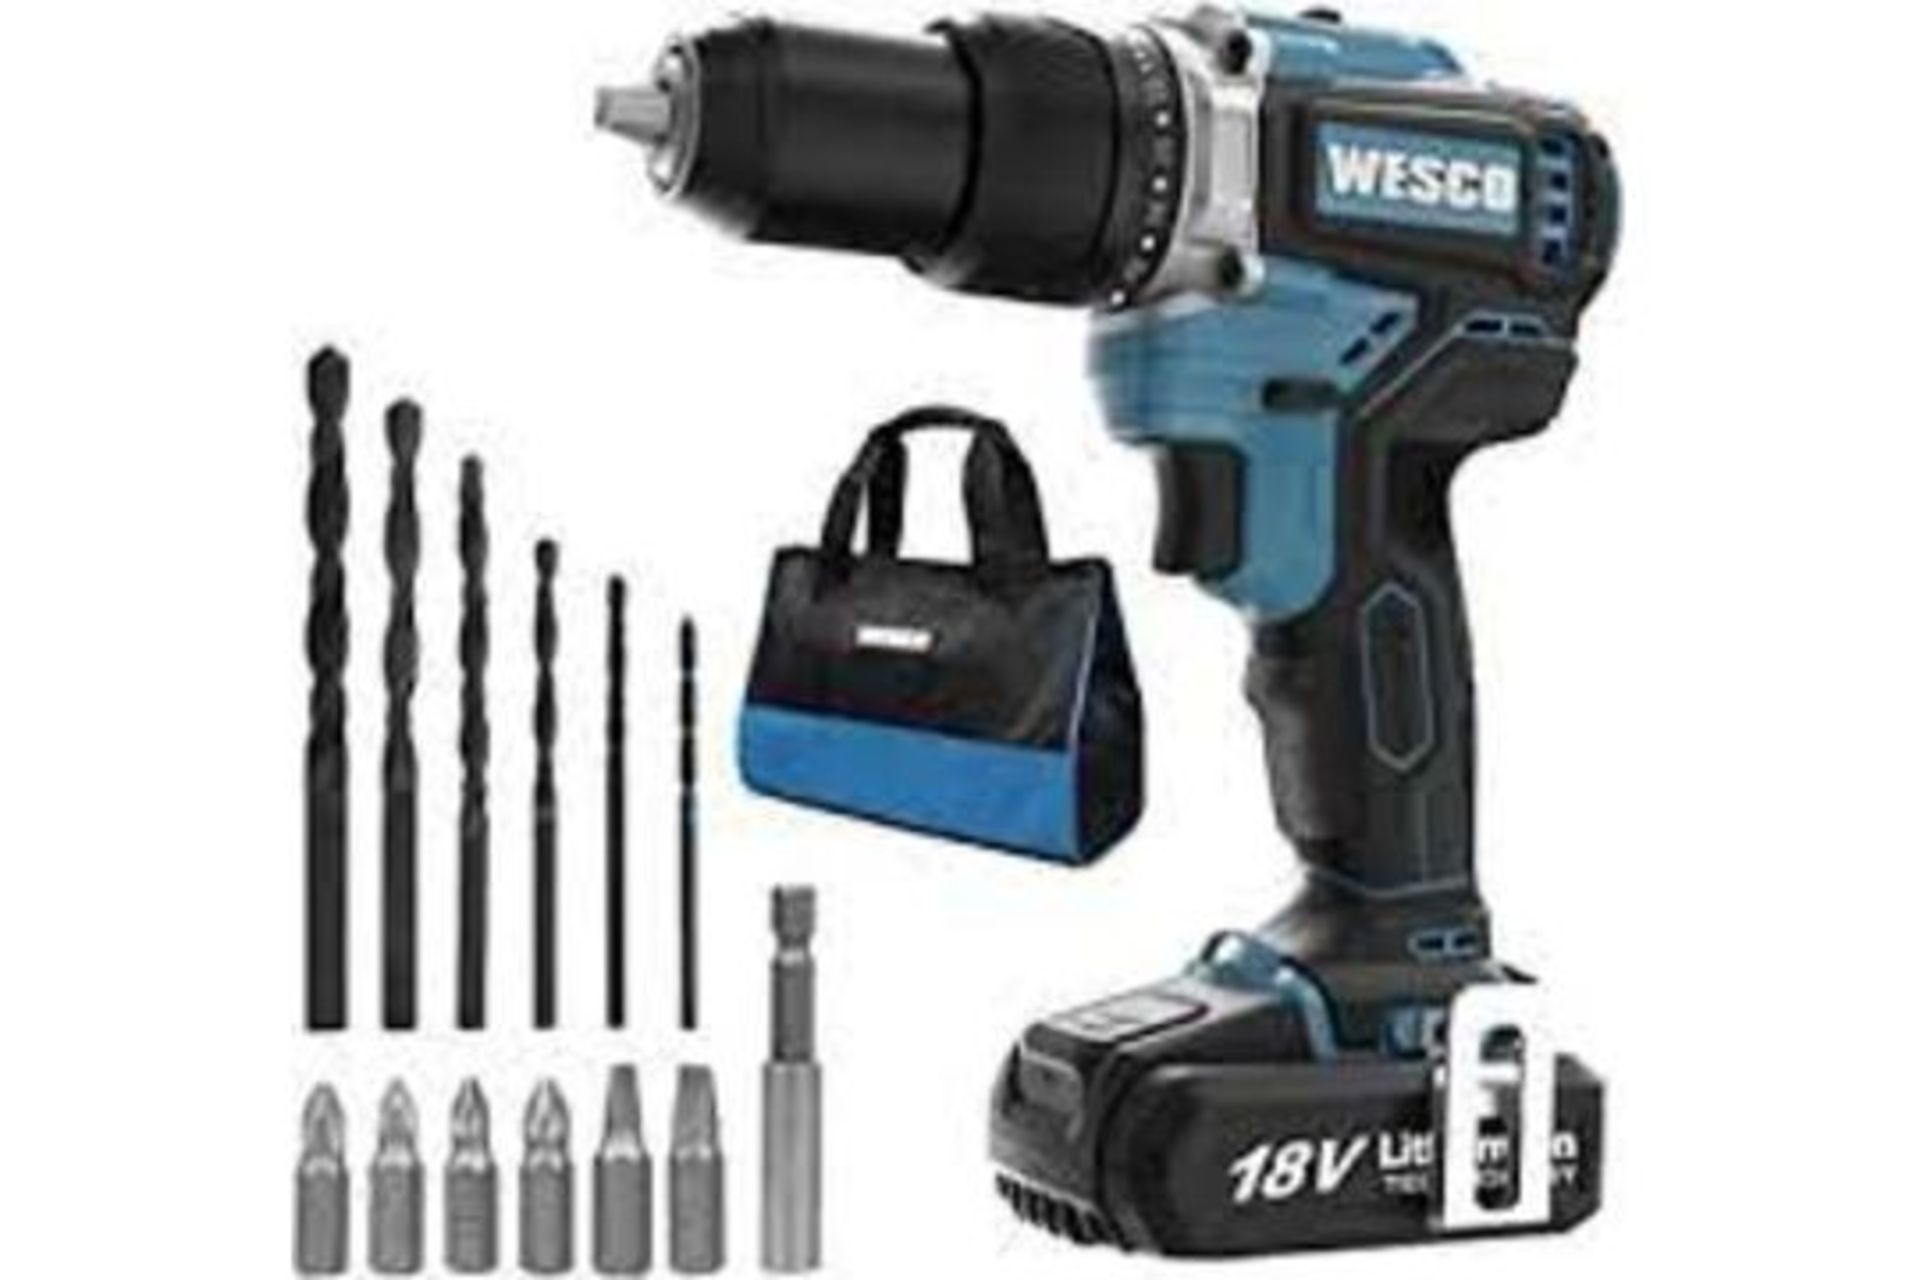 New Boxed WESCO 18V 2.0Ah Cordless Combi Drill with 13 Accessories, Hammer Drill Max Torque 60 N.